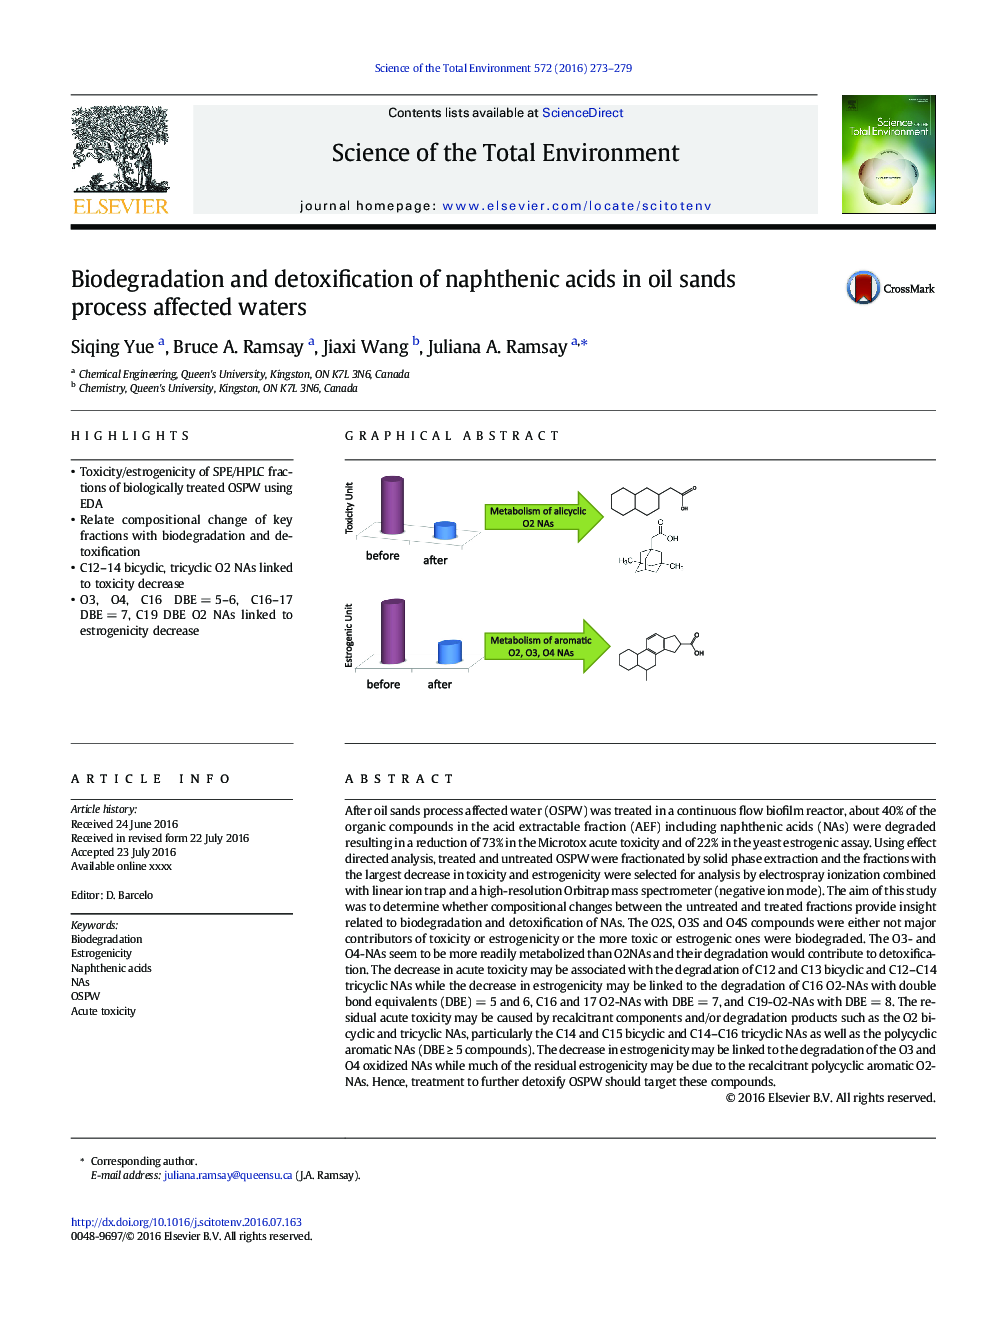 Biodegradation and detoxification of naphthenic acids in oil sands process affected waters